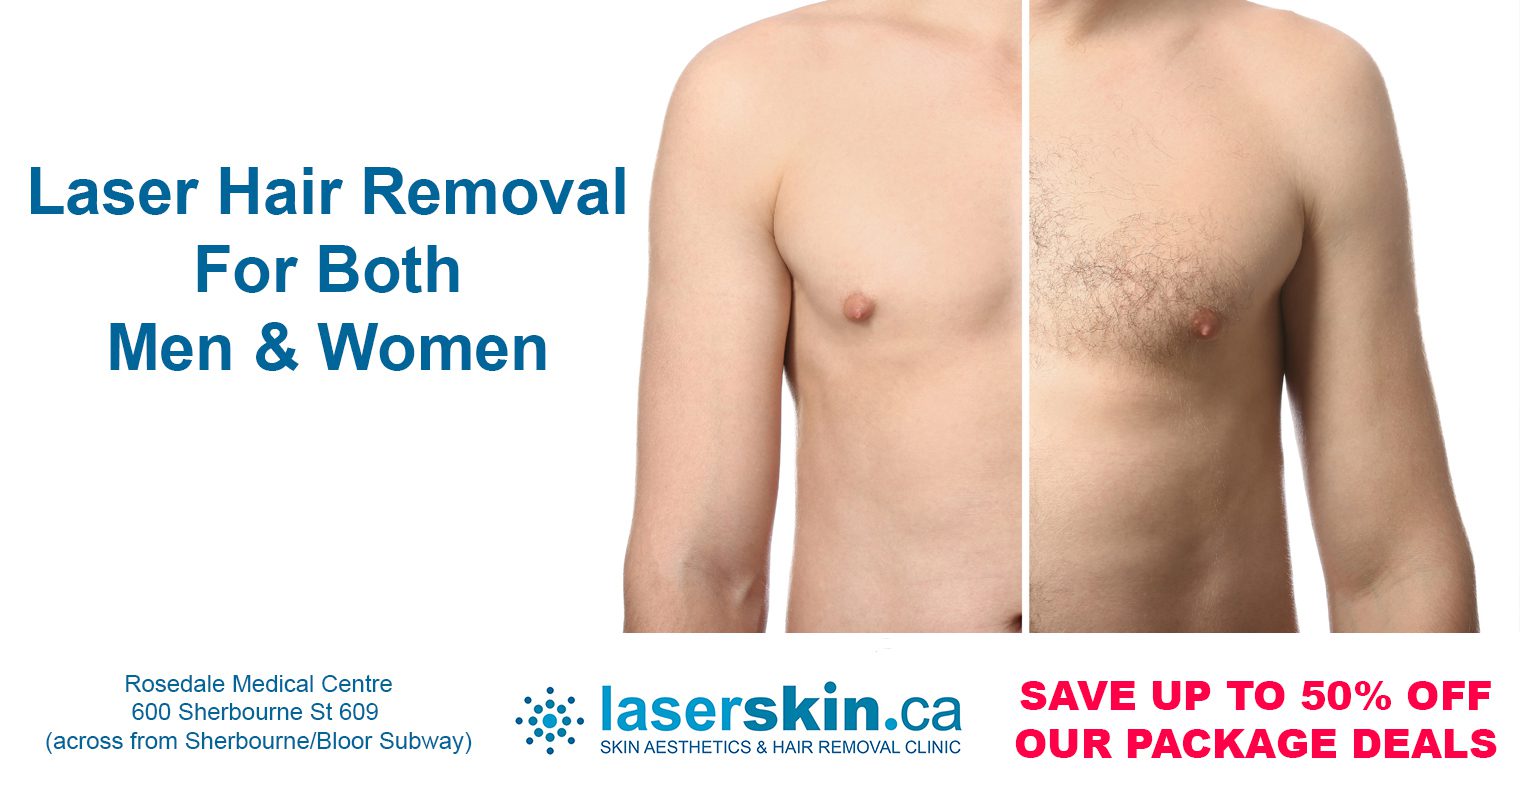 how much does laser hair removal cost Toronto